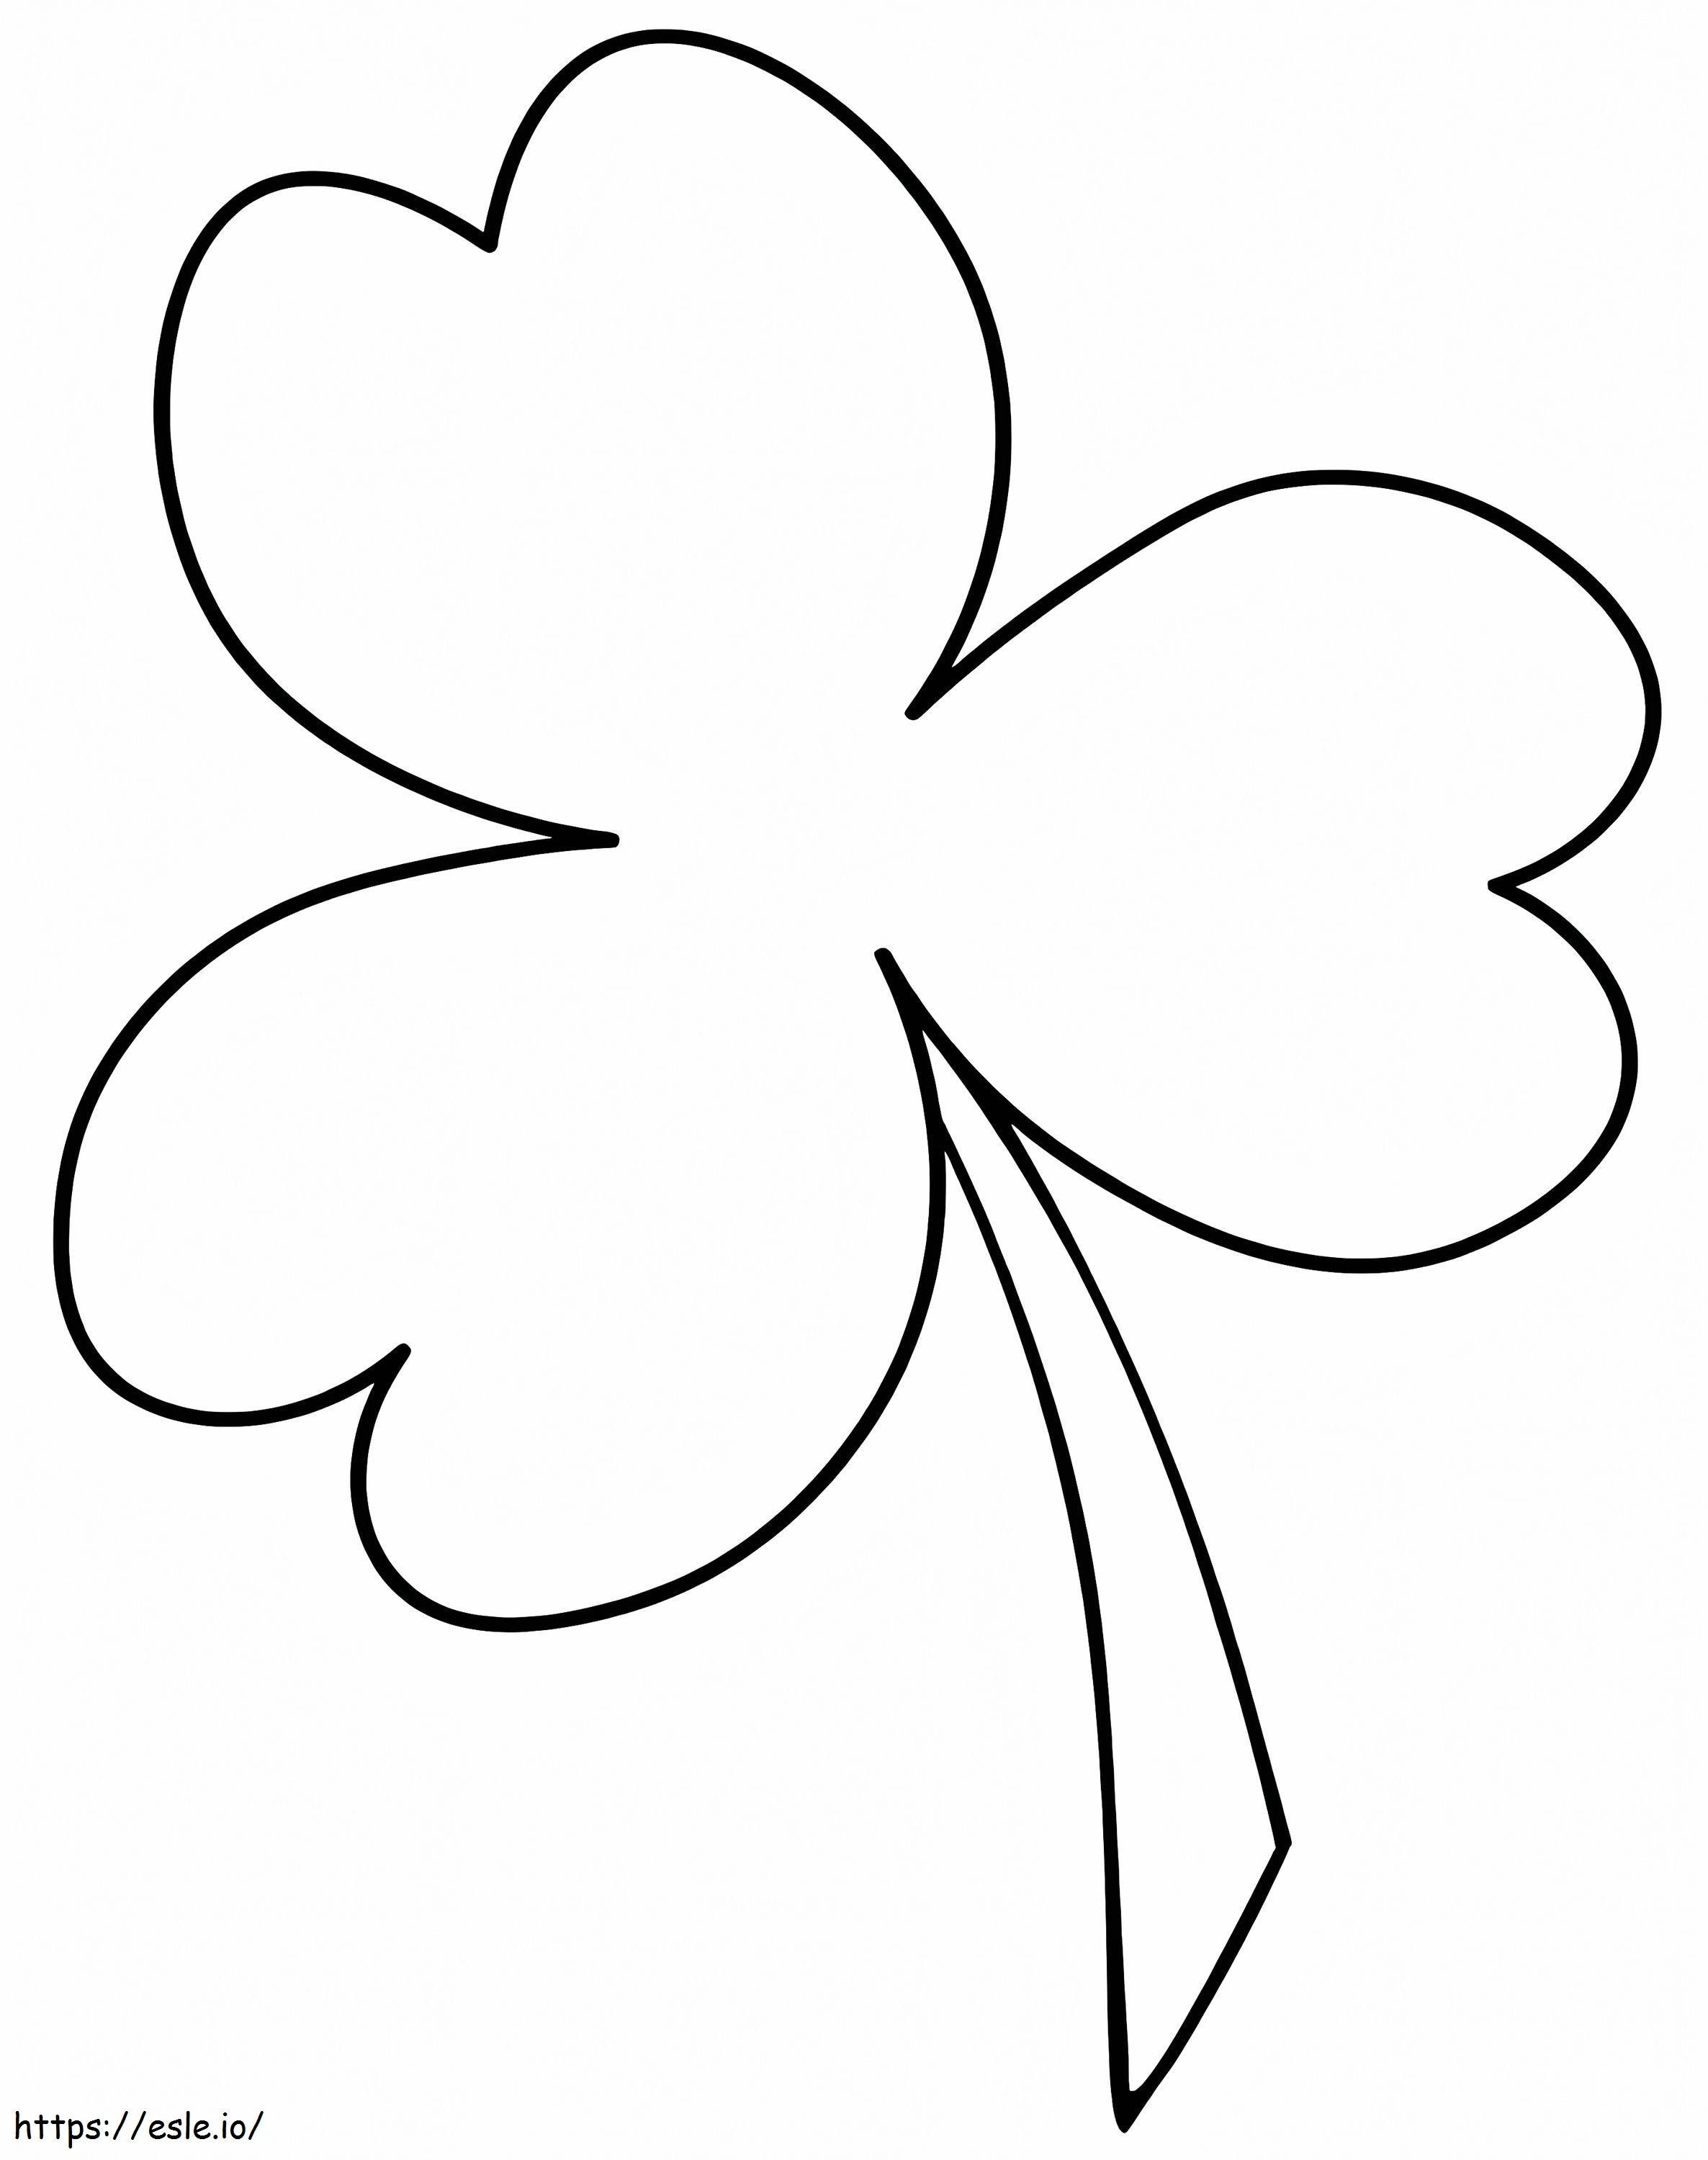 Shamrock To Color coloring page